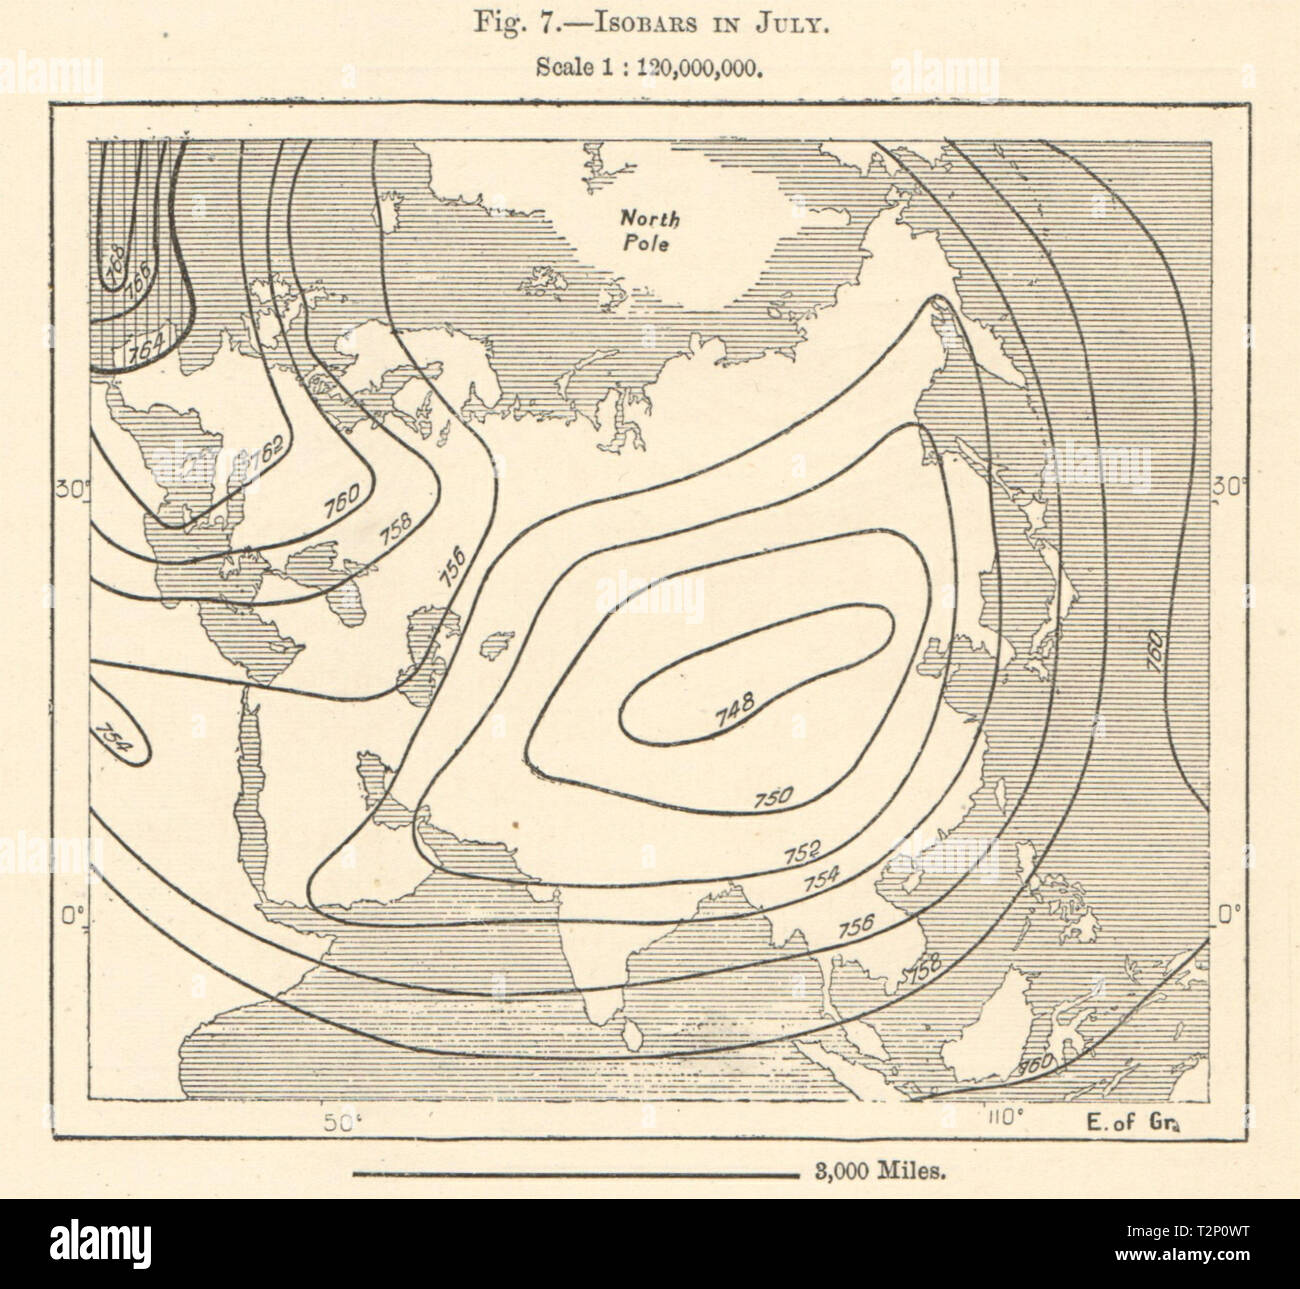 Isobars in July. Asia. Sketch map 1885 old antique vintage plan chart Stock Photo